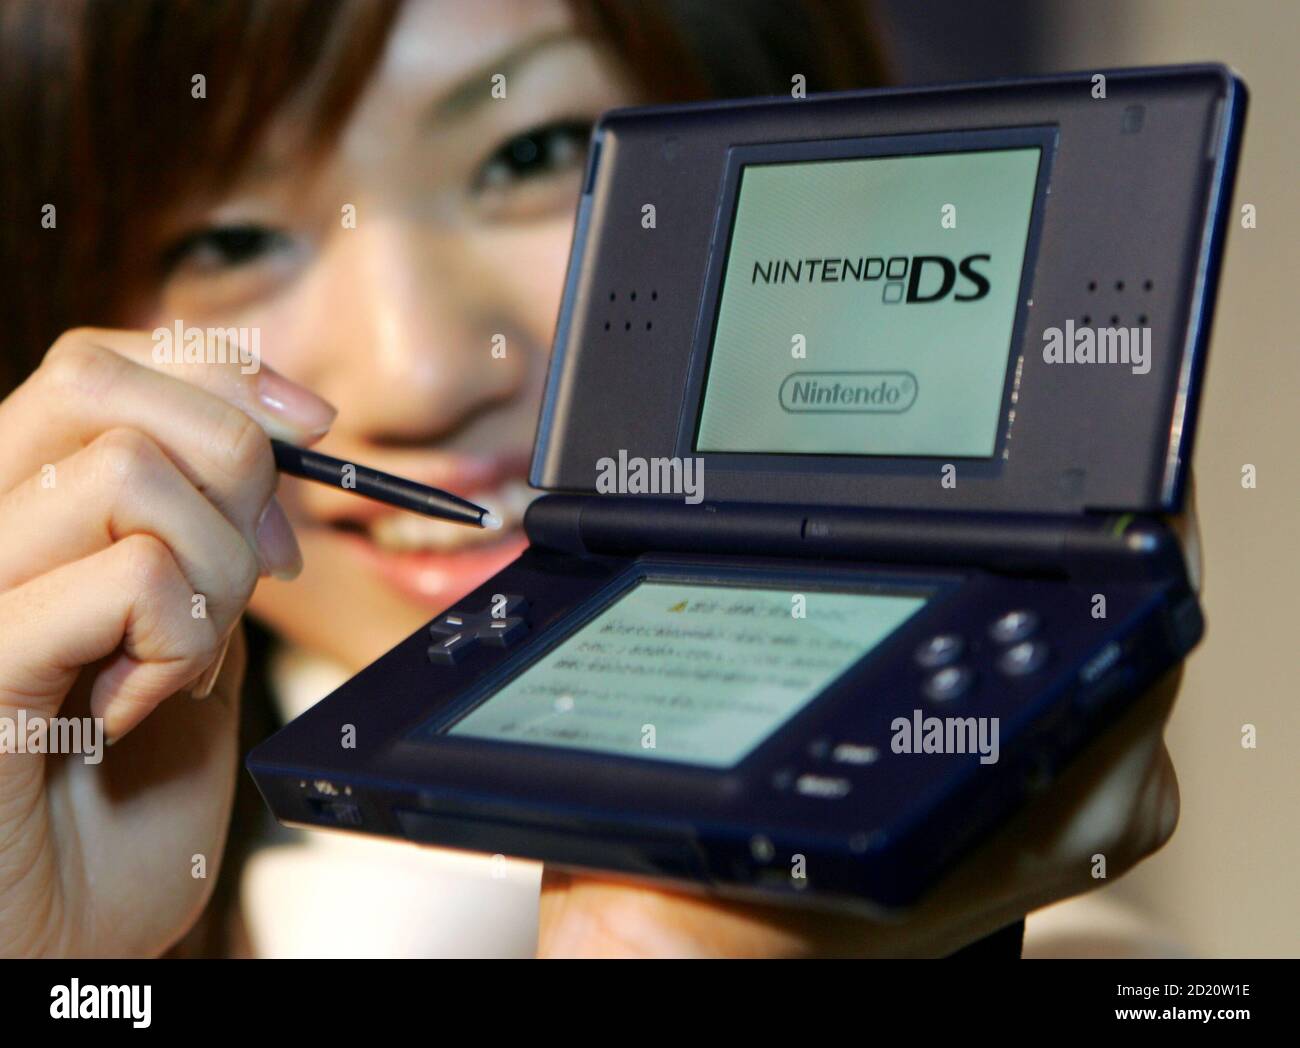 A Japanese model shows off Nintendo Co.'s new dual screen handled video  game console "Nintendo DS Lite" at an unveiling in Tokyo February 15, 2006.  The 218-gram (7.69-ounce) game console will start